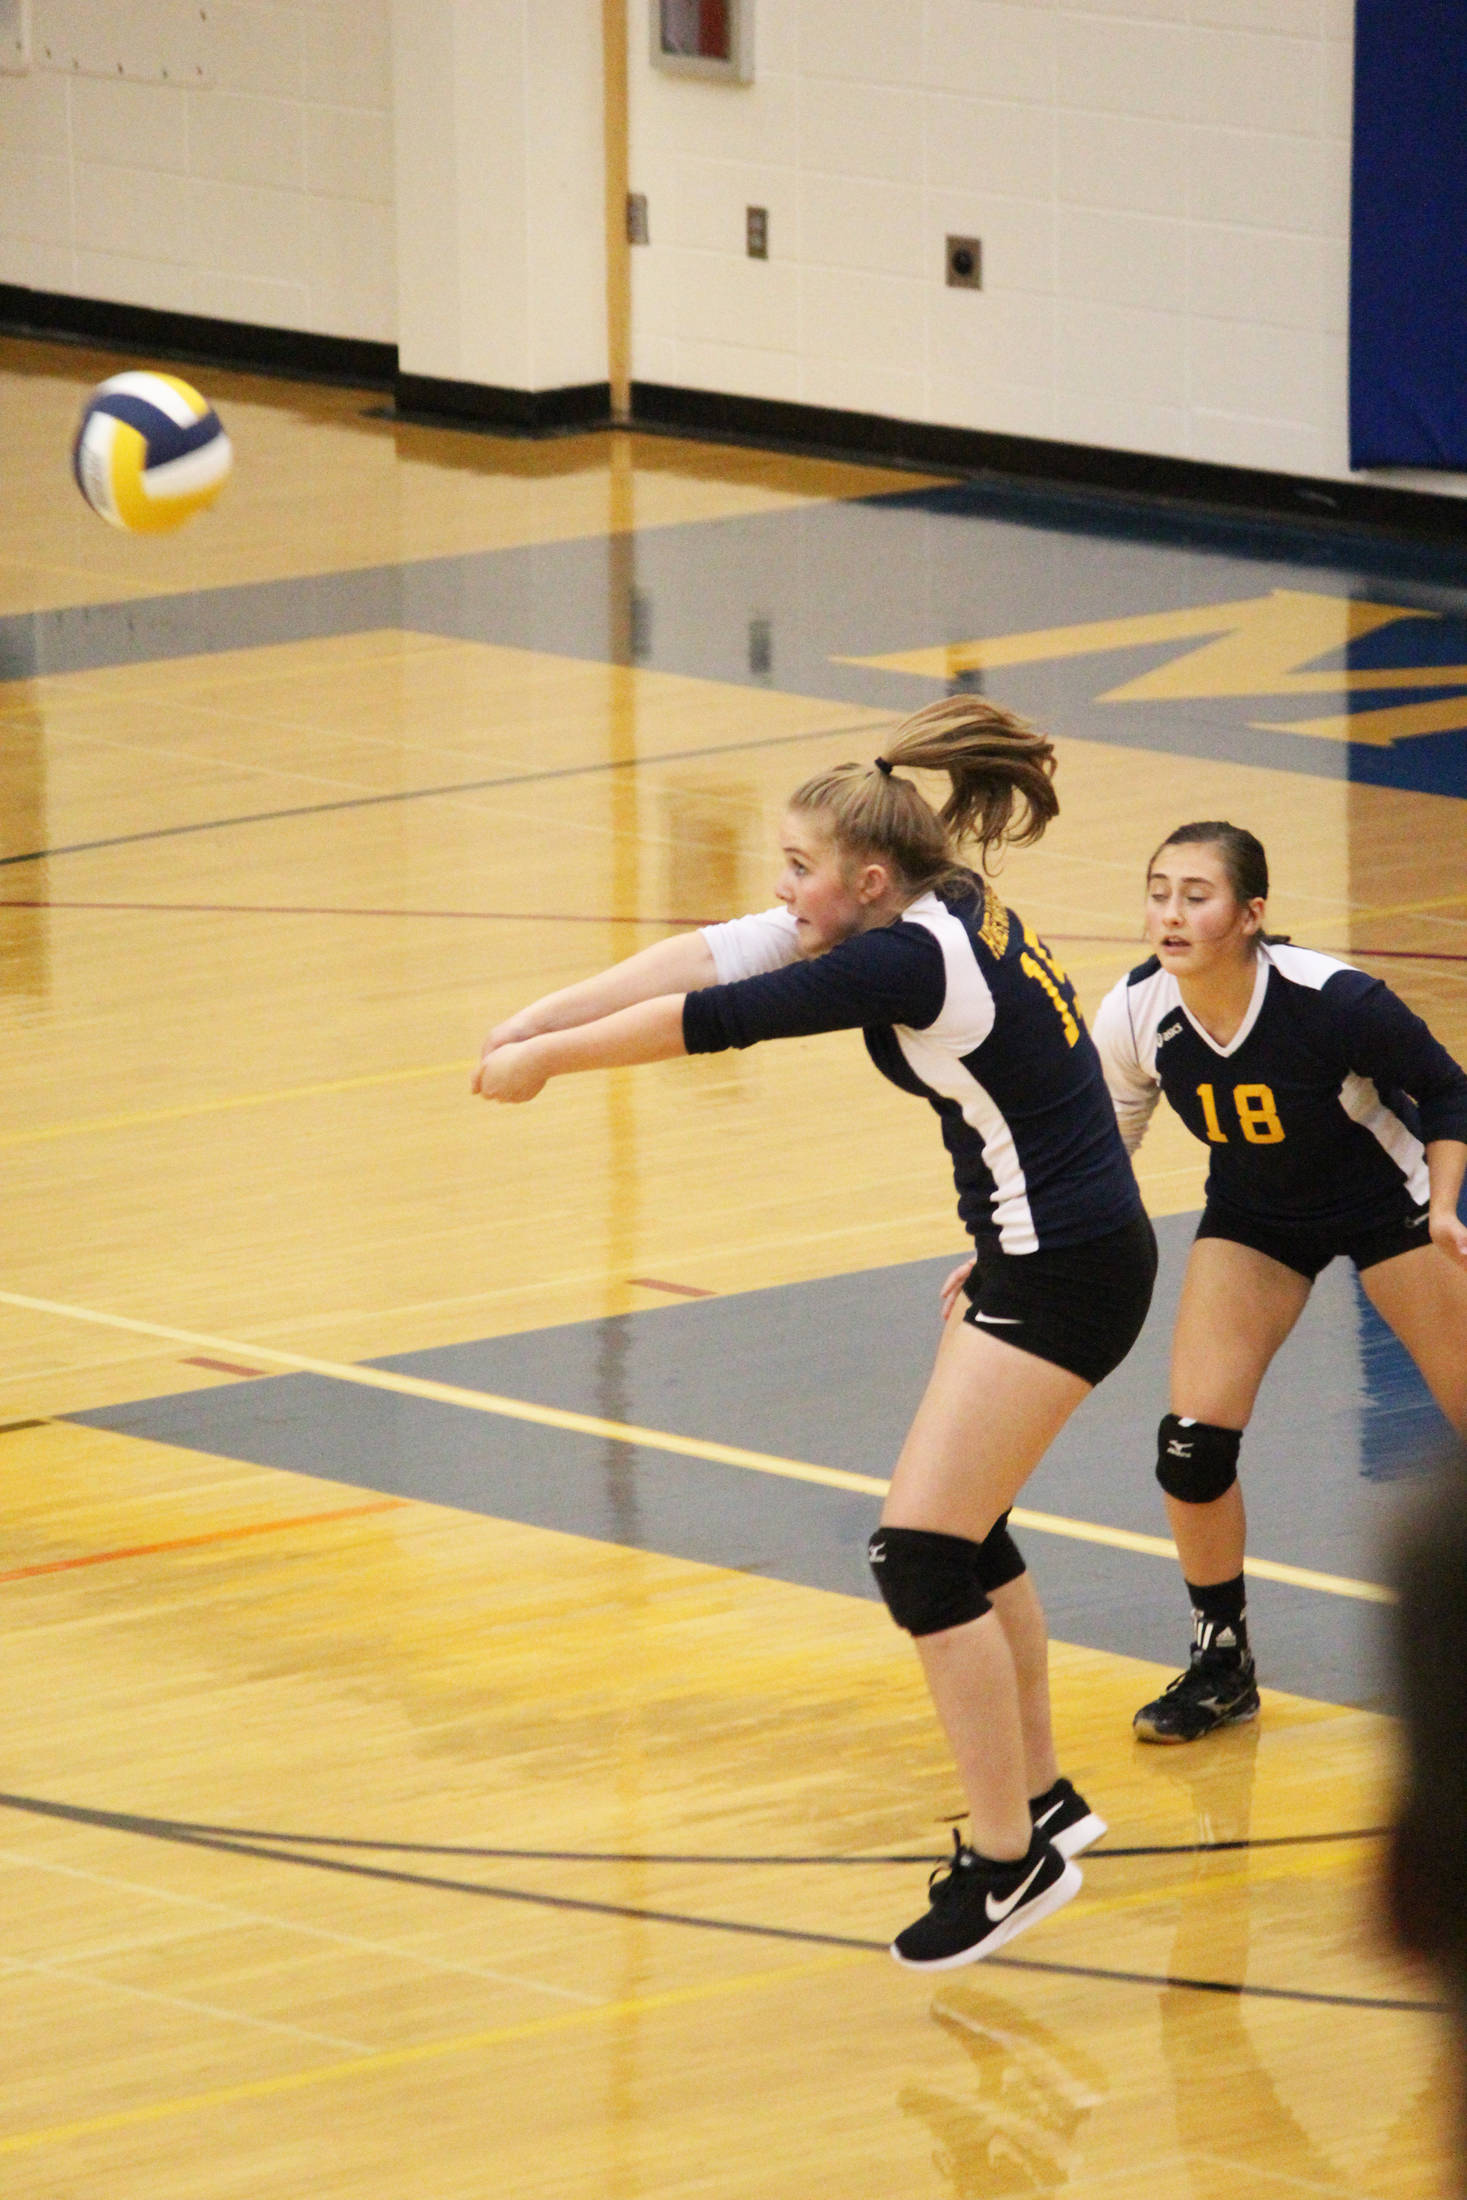 Freshman Paige Jones bumps the ball to a teammate during the Homer varsity volleyball team’s match against Joe Redington Jr/Sr High School on Friday, Sept. 8, 2017 in the Alice Witte Gymnasium in Homer, Alaska. The Mariners the first three sets to beat the Huskies. (Photo by Megan Pacer/Homer News)